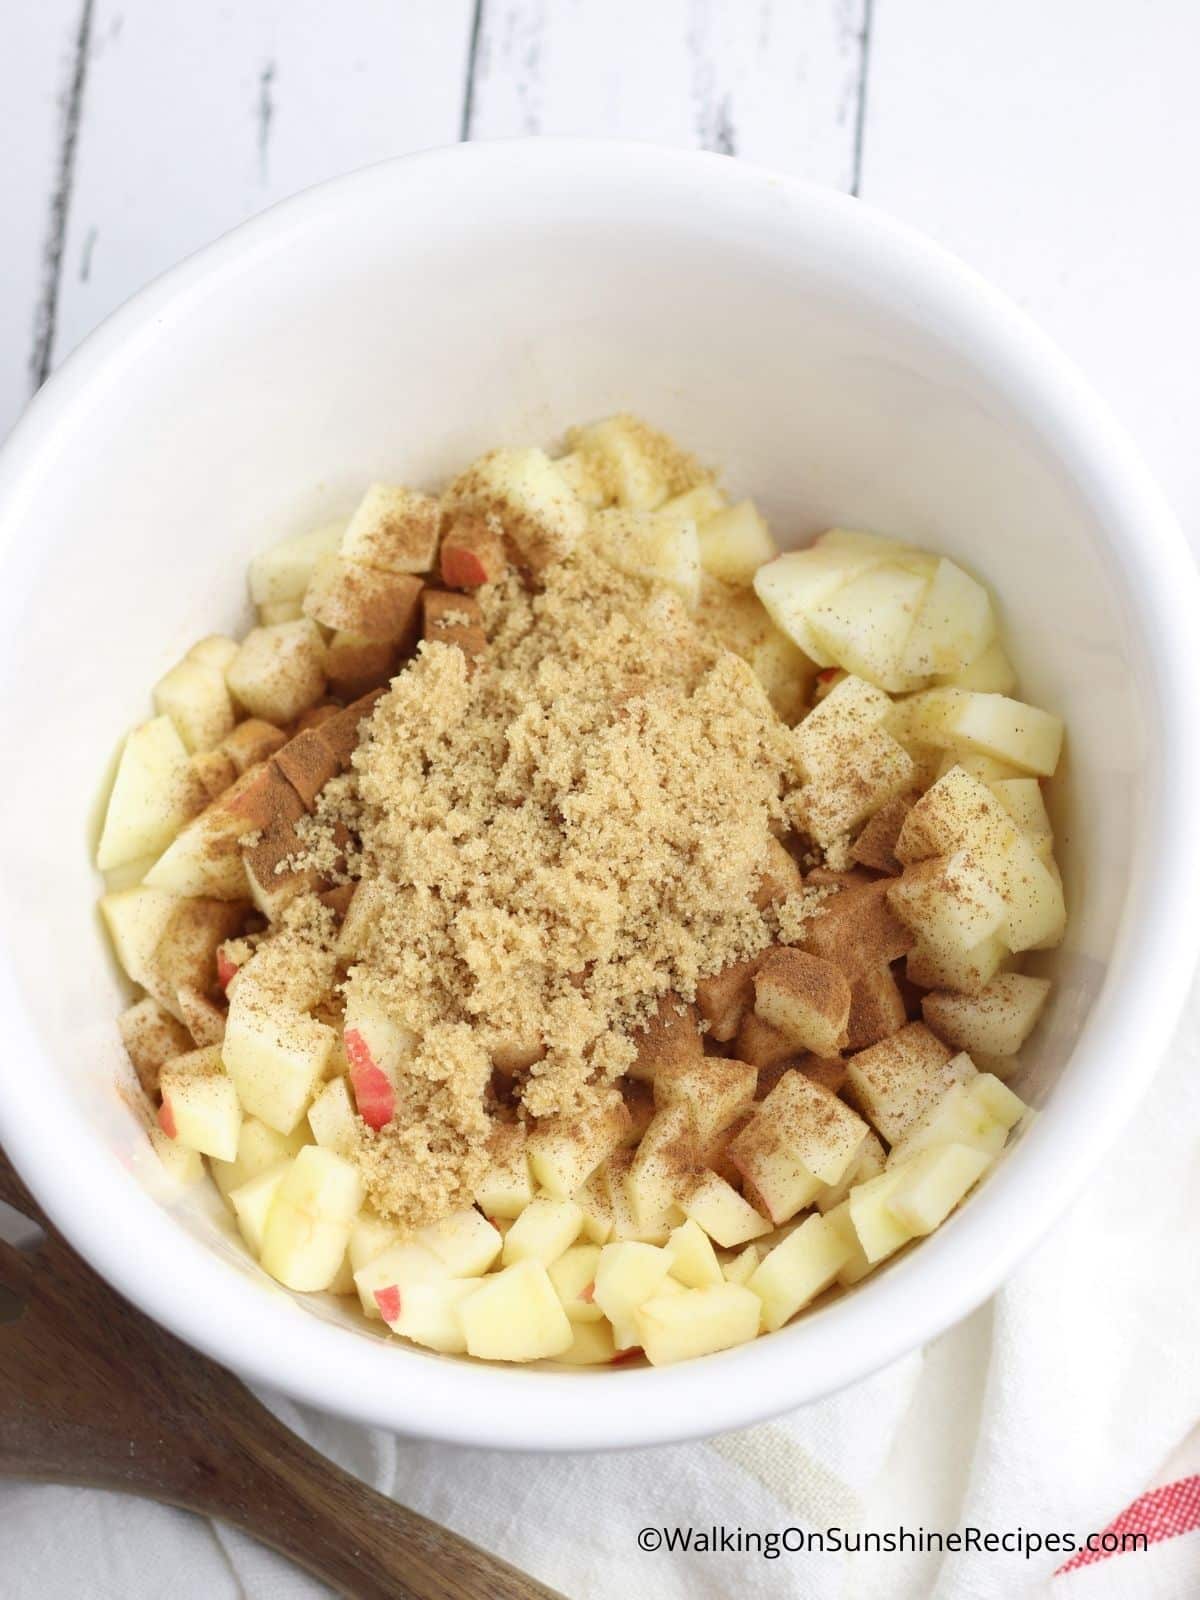 brown sugar on top of chopped apples in white bowl.